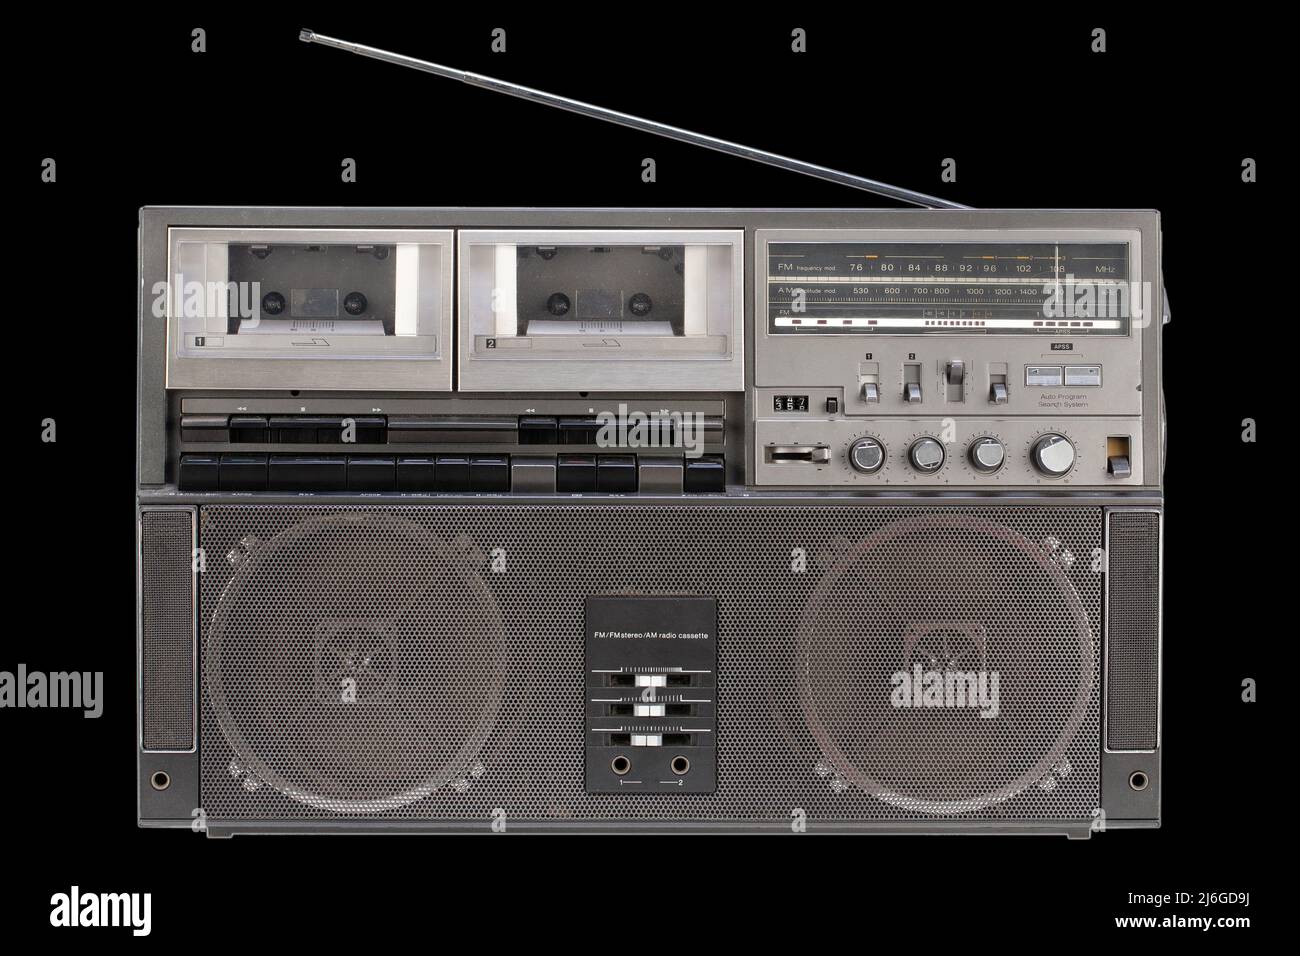 Vintage portable stereo boombox radio cassette recorder from 80s on black background. Stock Photo